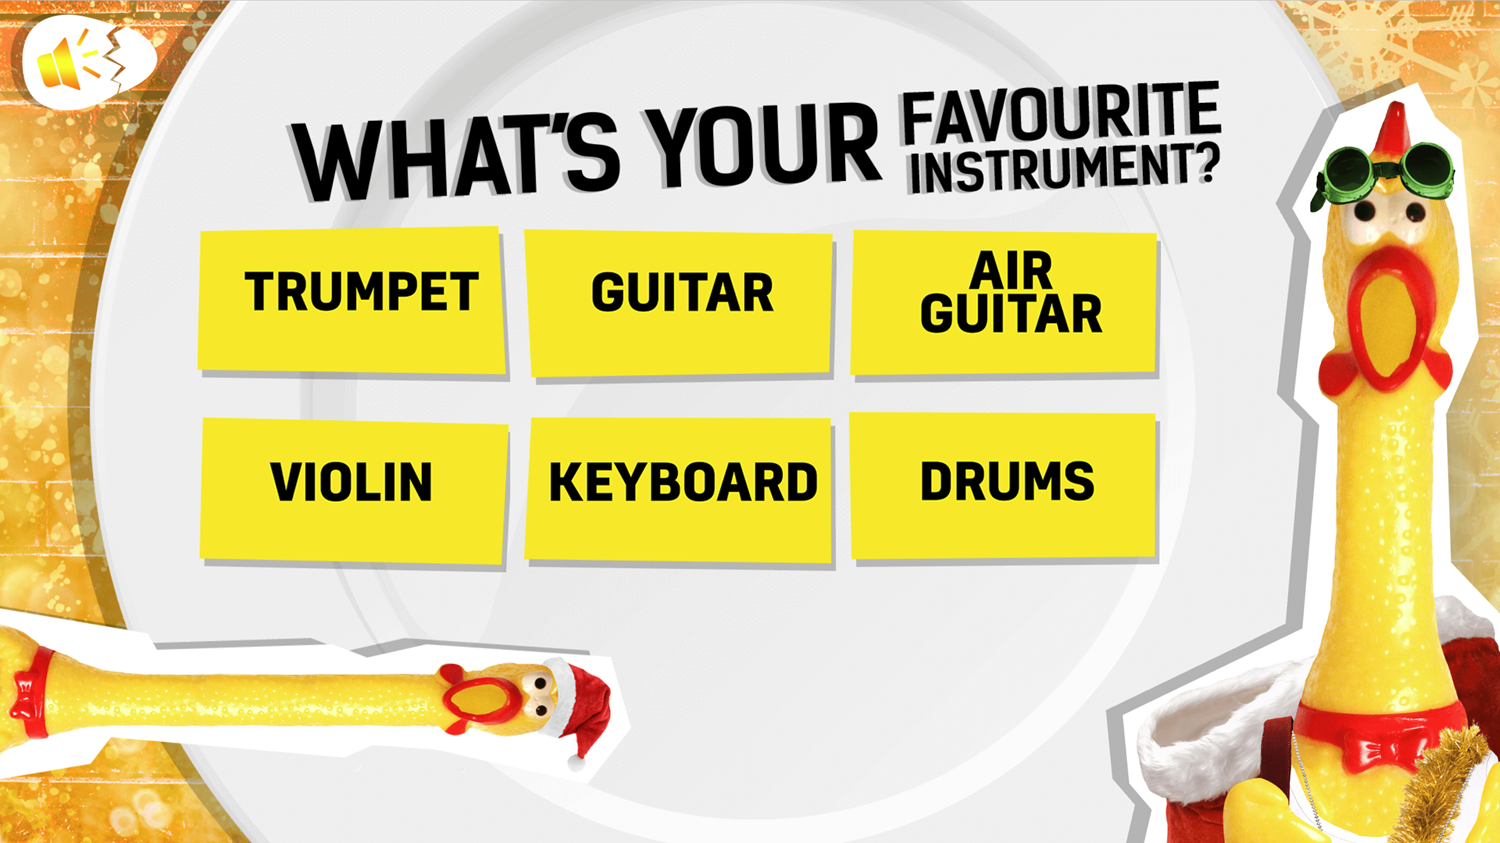 What's Your Chicken Name Game Favorite Musical Instrument Screen Screenshot.